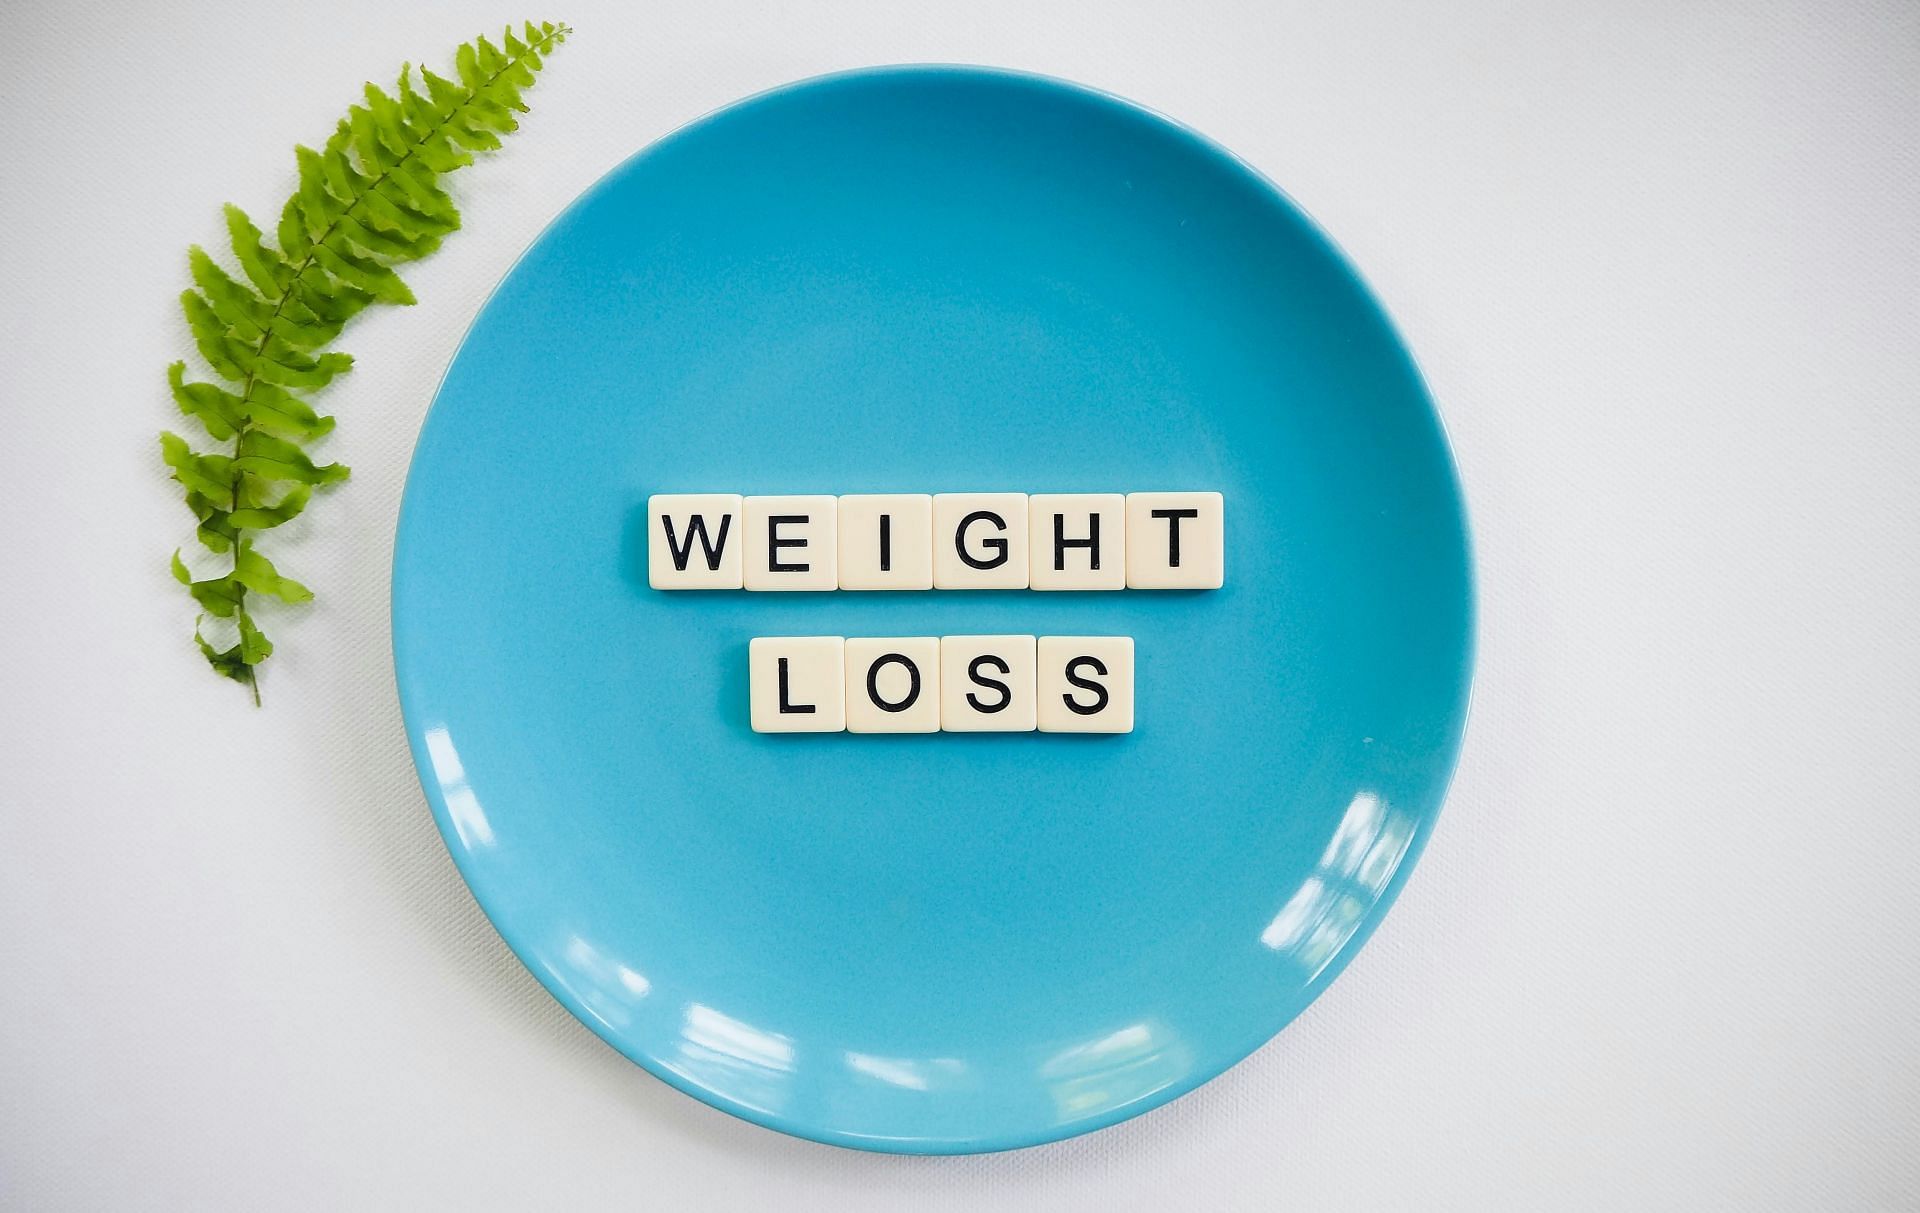 Importance of weight loss (image sourced via Pexels / Photo by total shape)